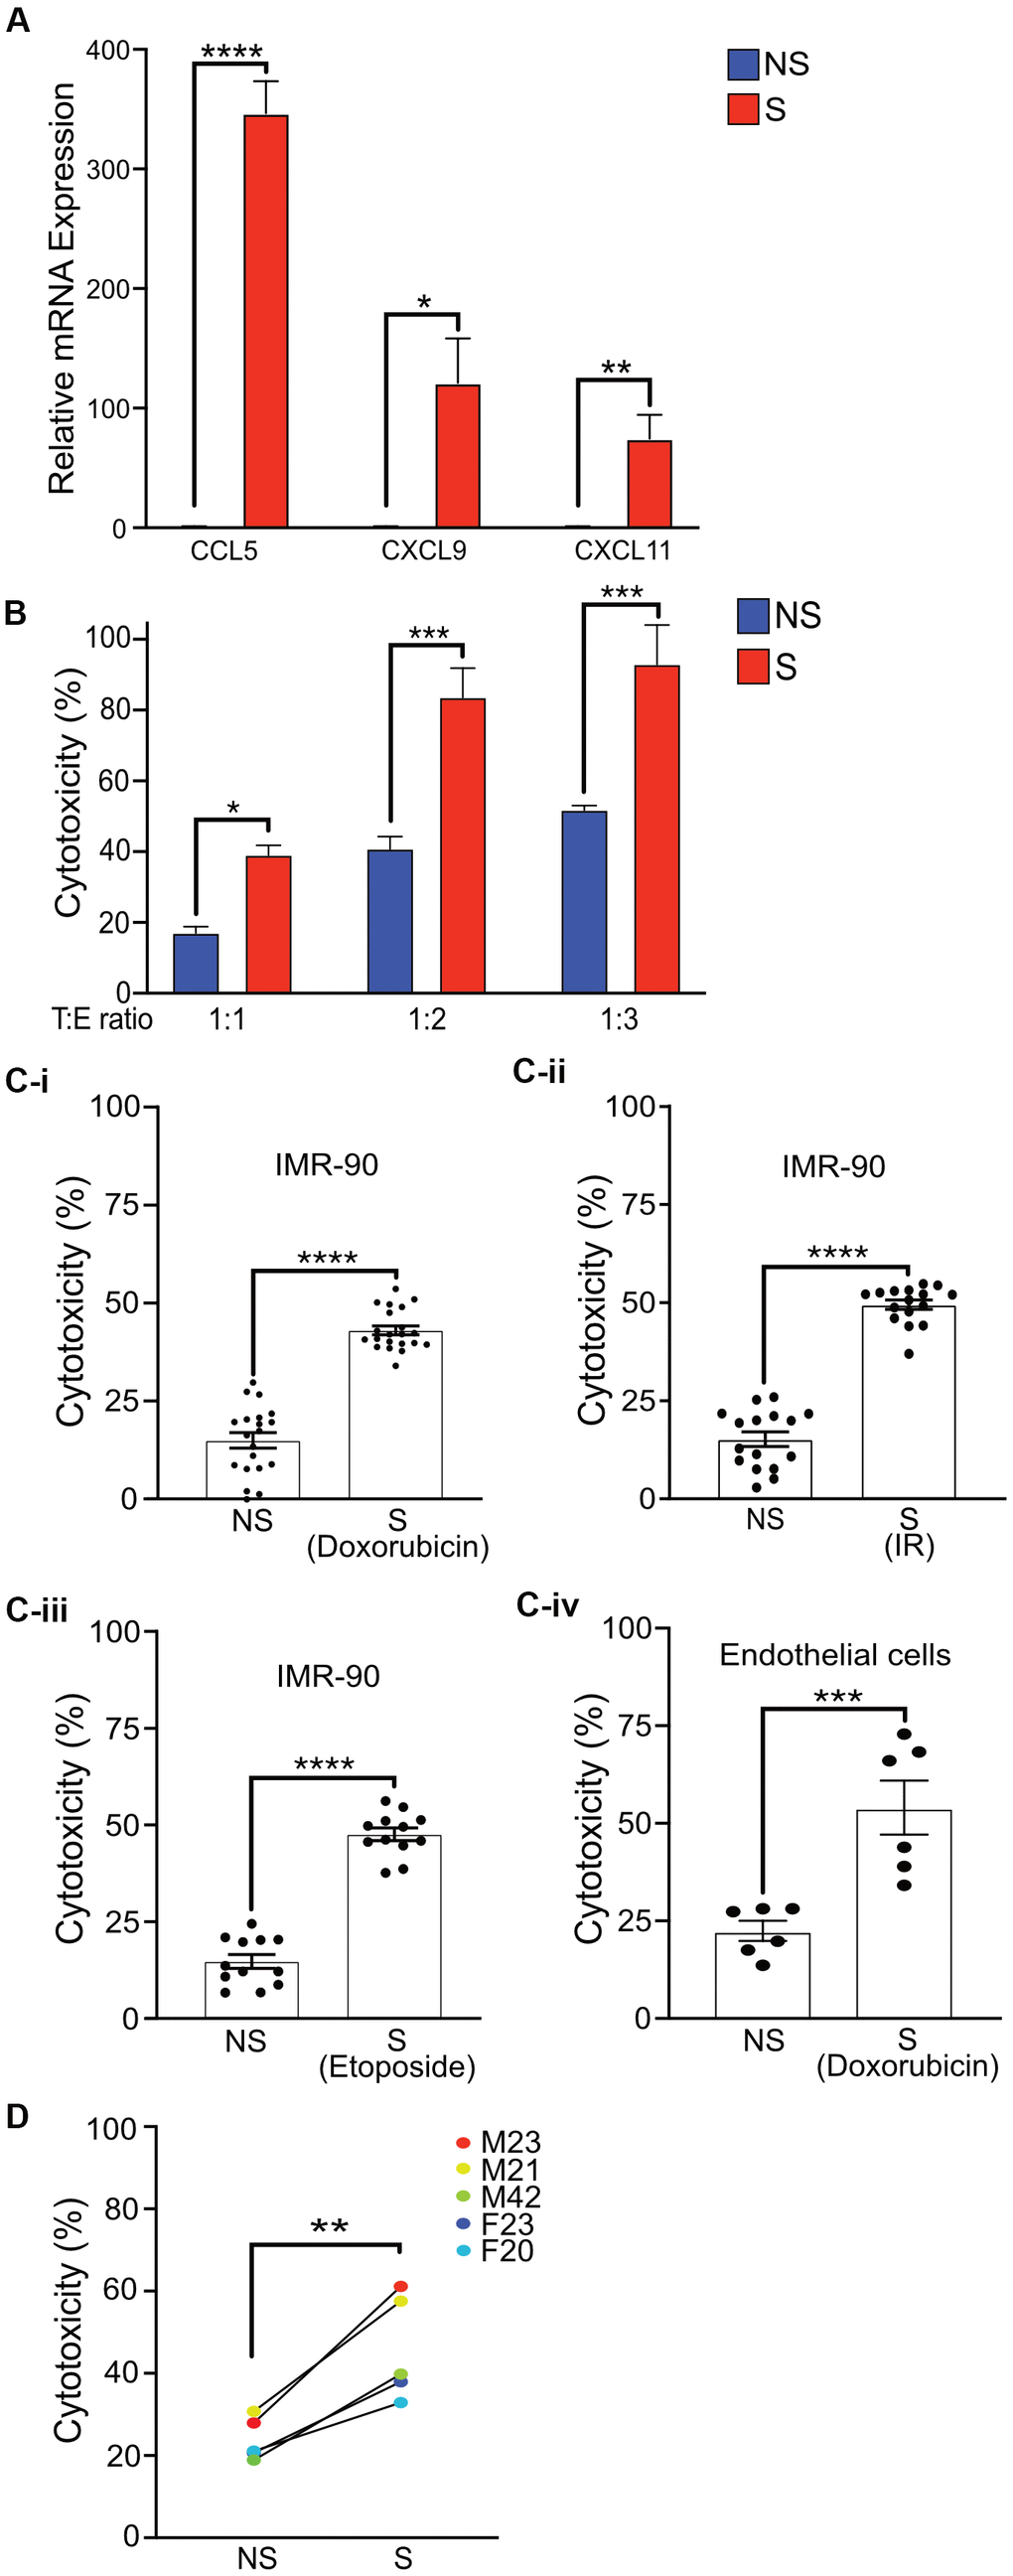 Activated primary NK cells selectively eliminate senescent cells. (A) Quantitative Realtime PCR was performed to detect the mRNA levels of CCL5, CXCL9, and CXCL11 in non-senescent and senescent IMR-90 fibroblasts. The results are presented as mean fold change in NS compared to S samples from two independent experiments performed in triplicate, and error bars represent ±SEM. Statistical analysis performed using unpaired t test. *p B) NS or S IMR-90 fibroblasts were co-incubated with NK cells for 16 h at T:E ratios of 1:1, 1:2 and 1:3 and cytotoxicity was evaluated by LDH release. The graphs show the mean and S.E. of % LDH release. NS or S (C-i) doxorubicin-treated (n=6), (C-ii) irradiated (n=3) or (C-iii) etoposide-treated (n=3) IMR-90 fibroblasts or (C-iv) doxorubicin-treated endothelial cells (n=2) were overlayed with NK cells for 16 hours at T:E ratio of 1:1, and cytotoxicity was evaluated by LDH release. The results are plotted as mean % cytotoxicity for NS and S cells with each experiment performed in at least triplicate. The graphs show mean % LDH release. (D) NK cells isolated and enriched from three different individuals were co-cultured with NS or S IMR-90 cells at T:E ratio of 1:1 and cytotoxicity was evaluated by LDH release after 16 hours of co-culture. Experiments were performed in triplicate and the results are plotted as mean % cytotoxicity for NS and S. Donor sex and age are indicated in the figure. Statistical analysis performed using unpaired t test. *p 